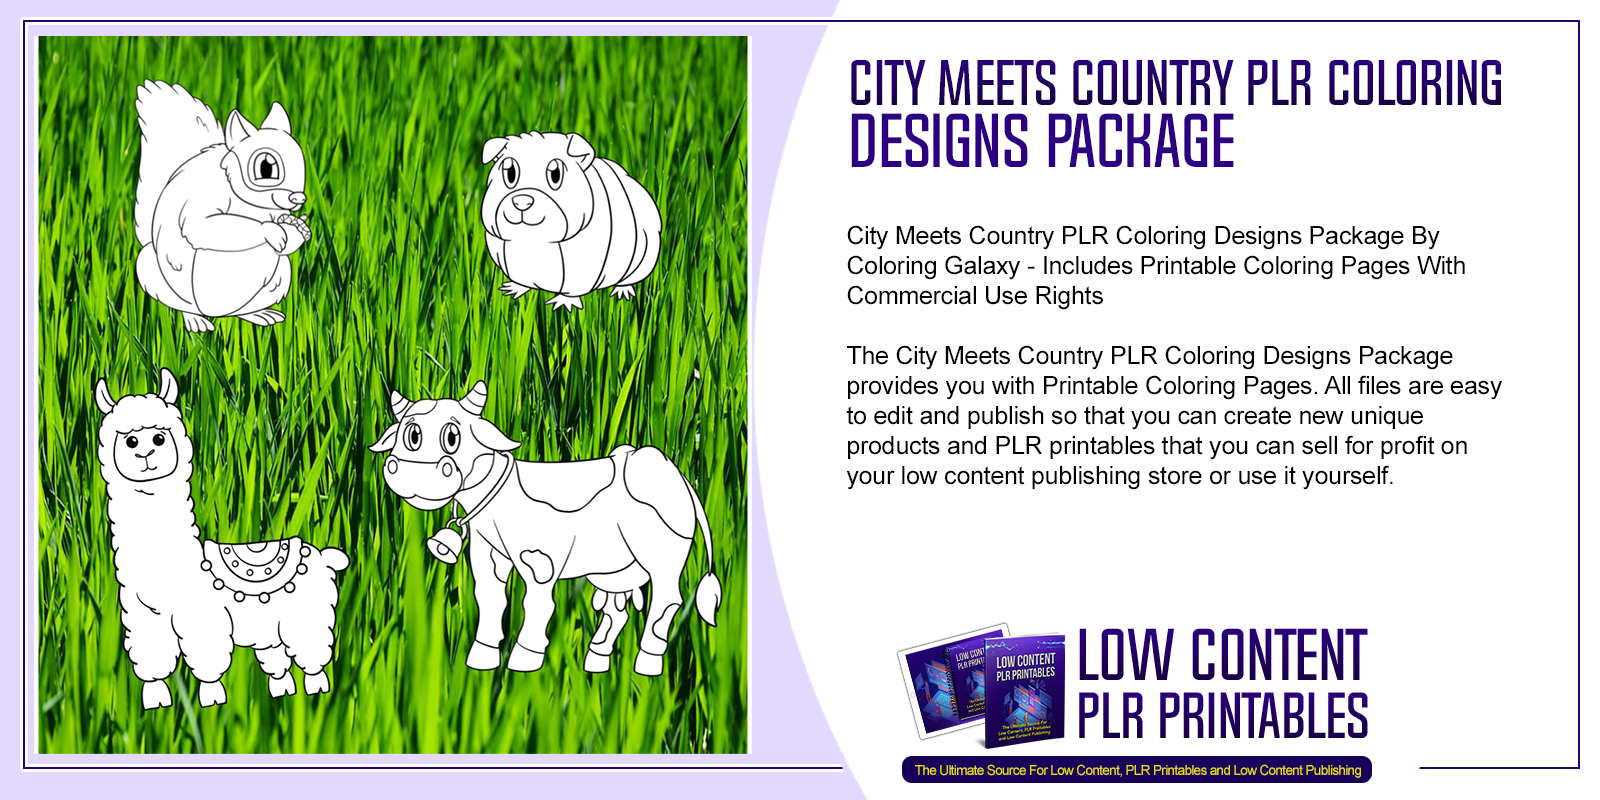 City Meets Country PLR Coloring Designs Package